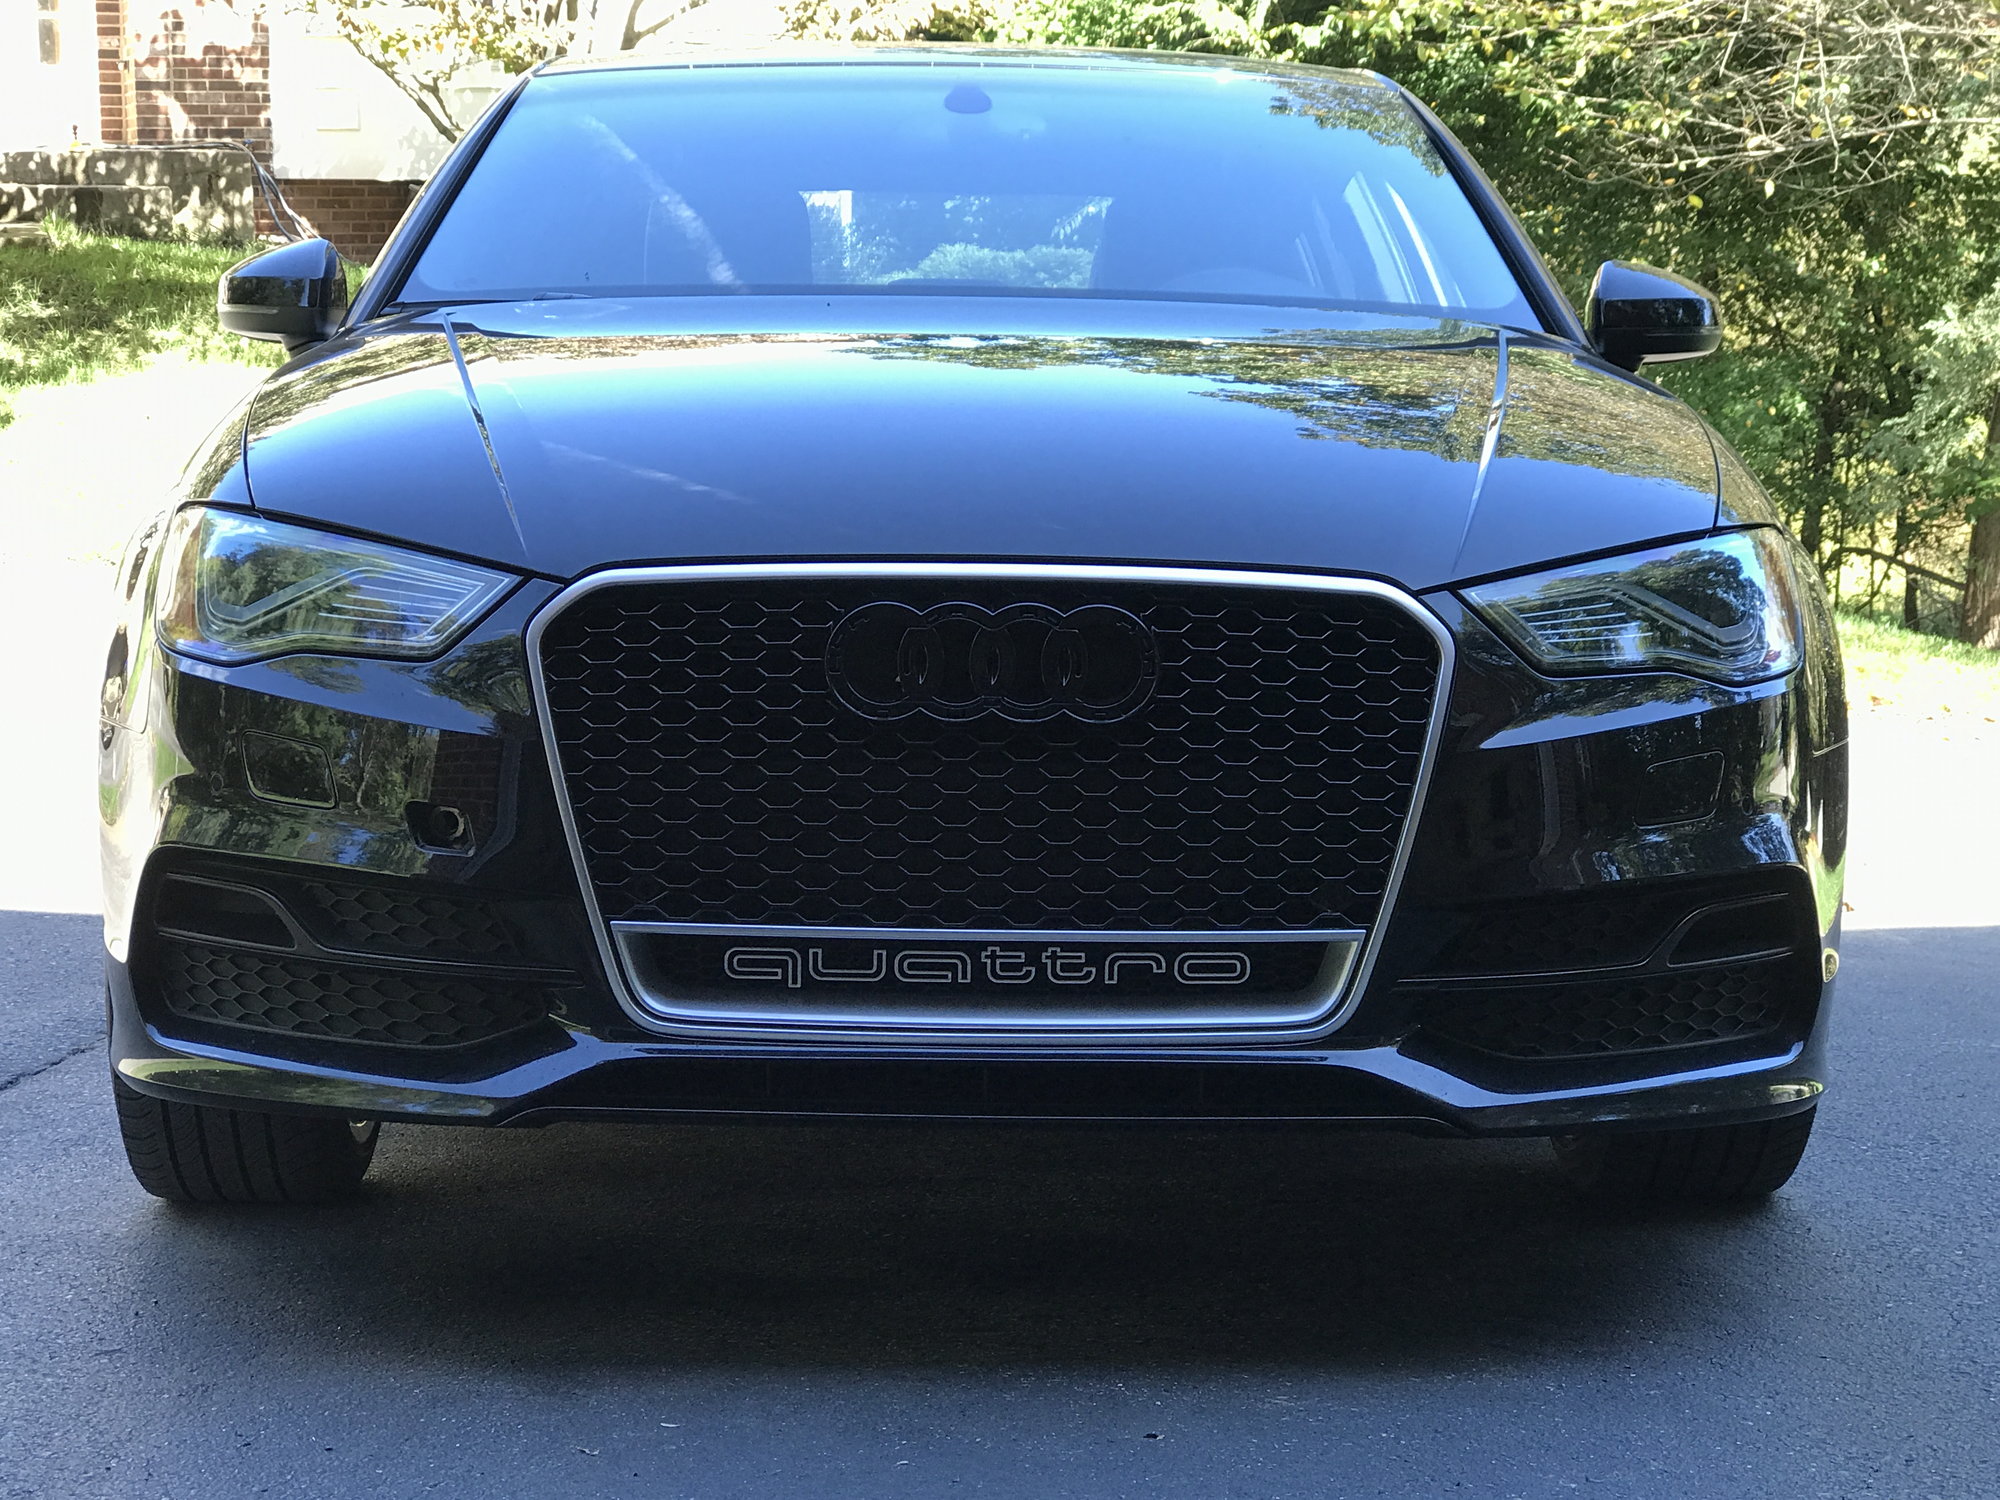 RS3 front Grill on 8V? - Page 4 - AudiWorld Forums